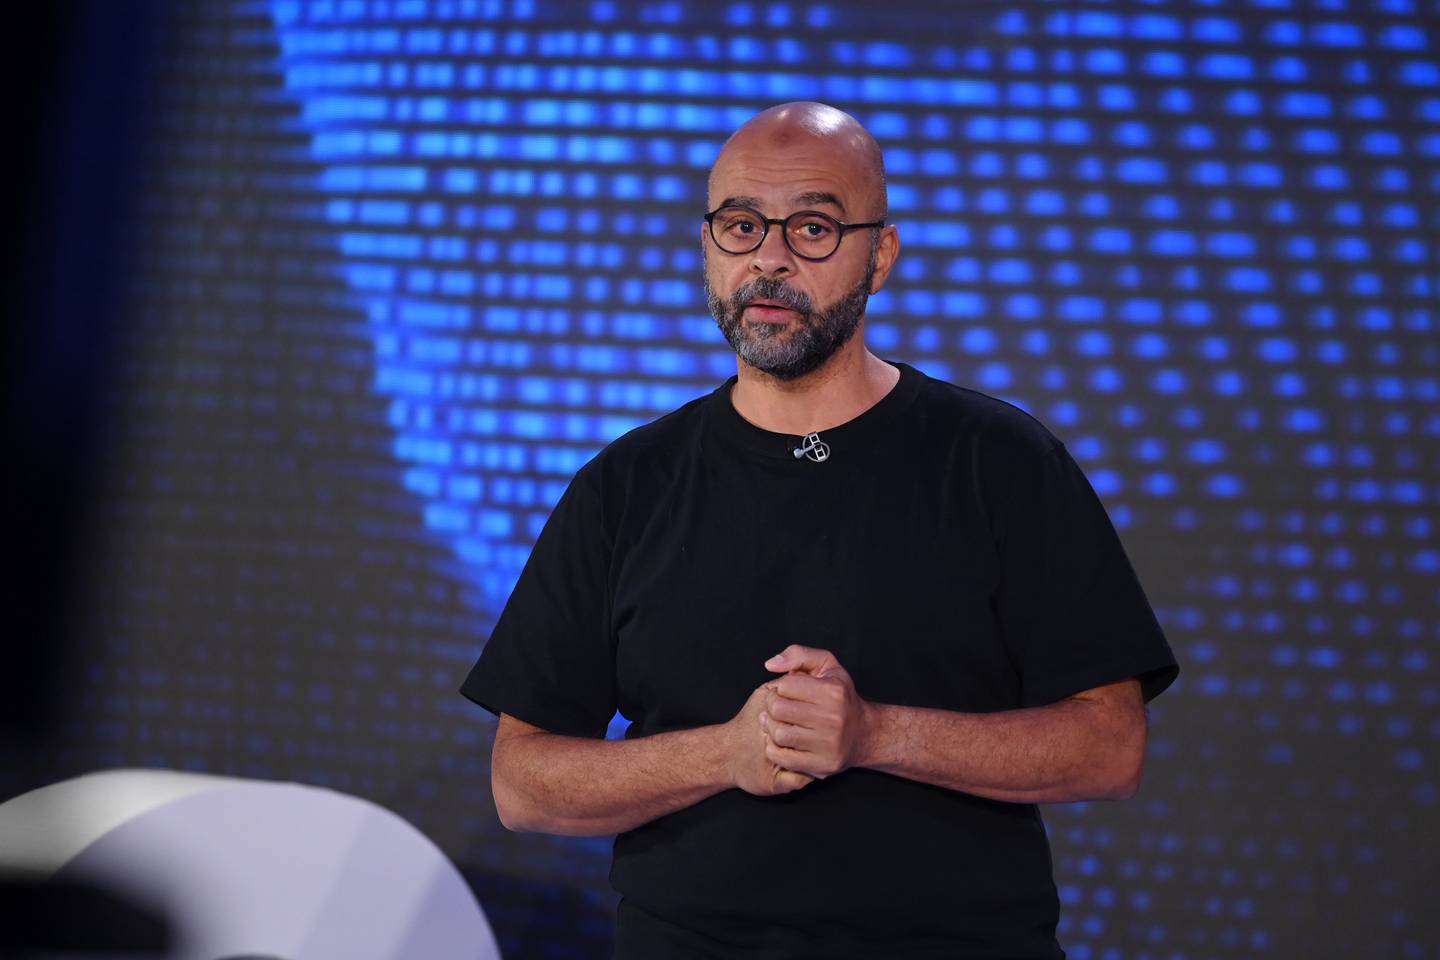 Mo Gawdat speaks about the risks of AI at BoF VOICES 2022.